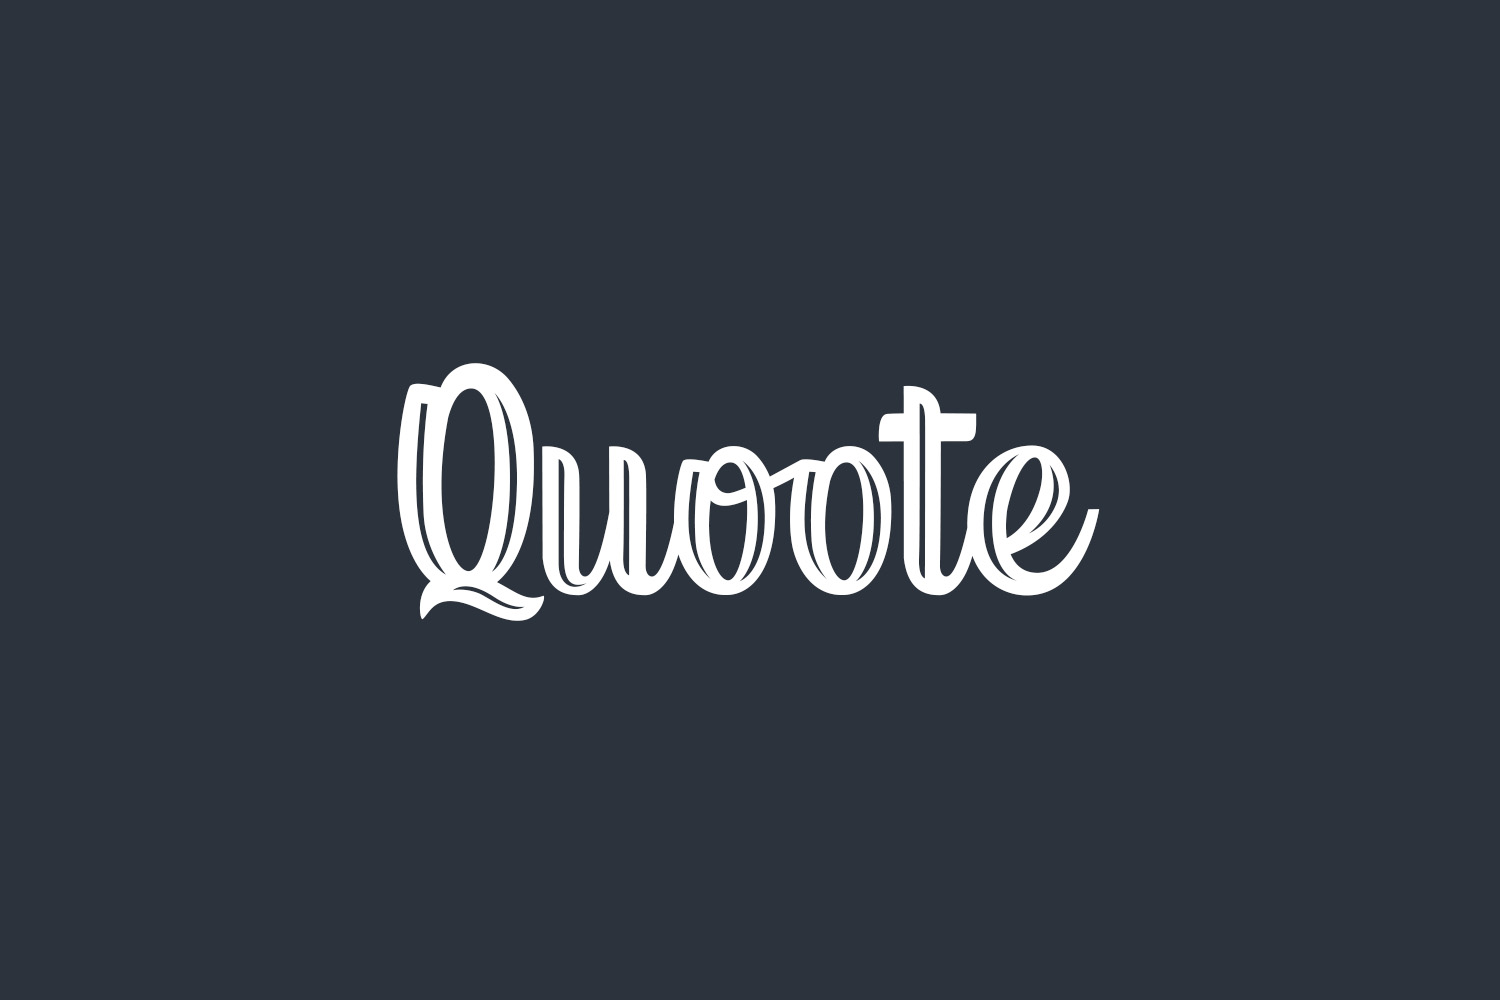 Quoote Free Font